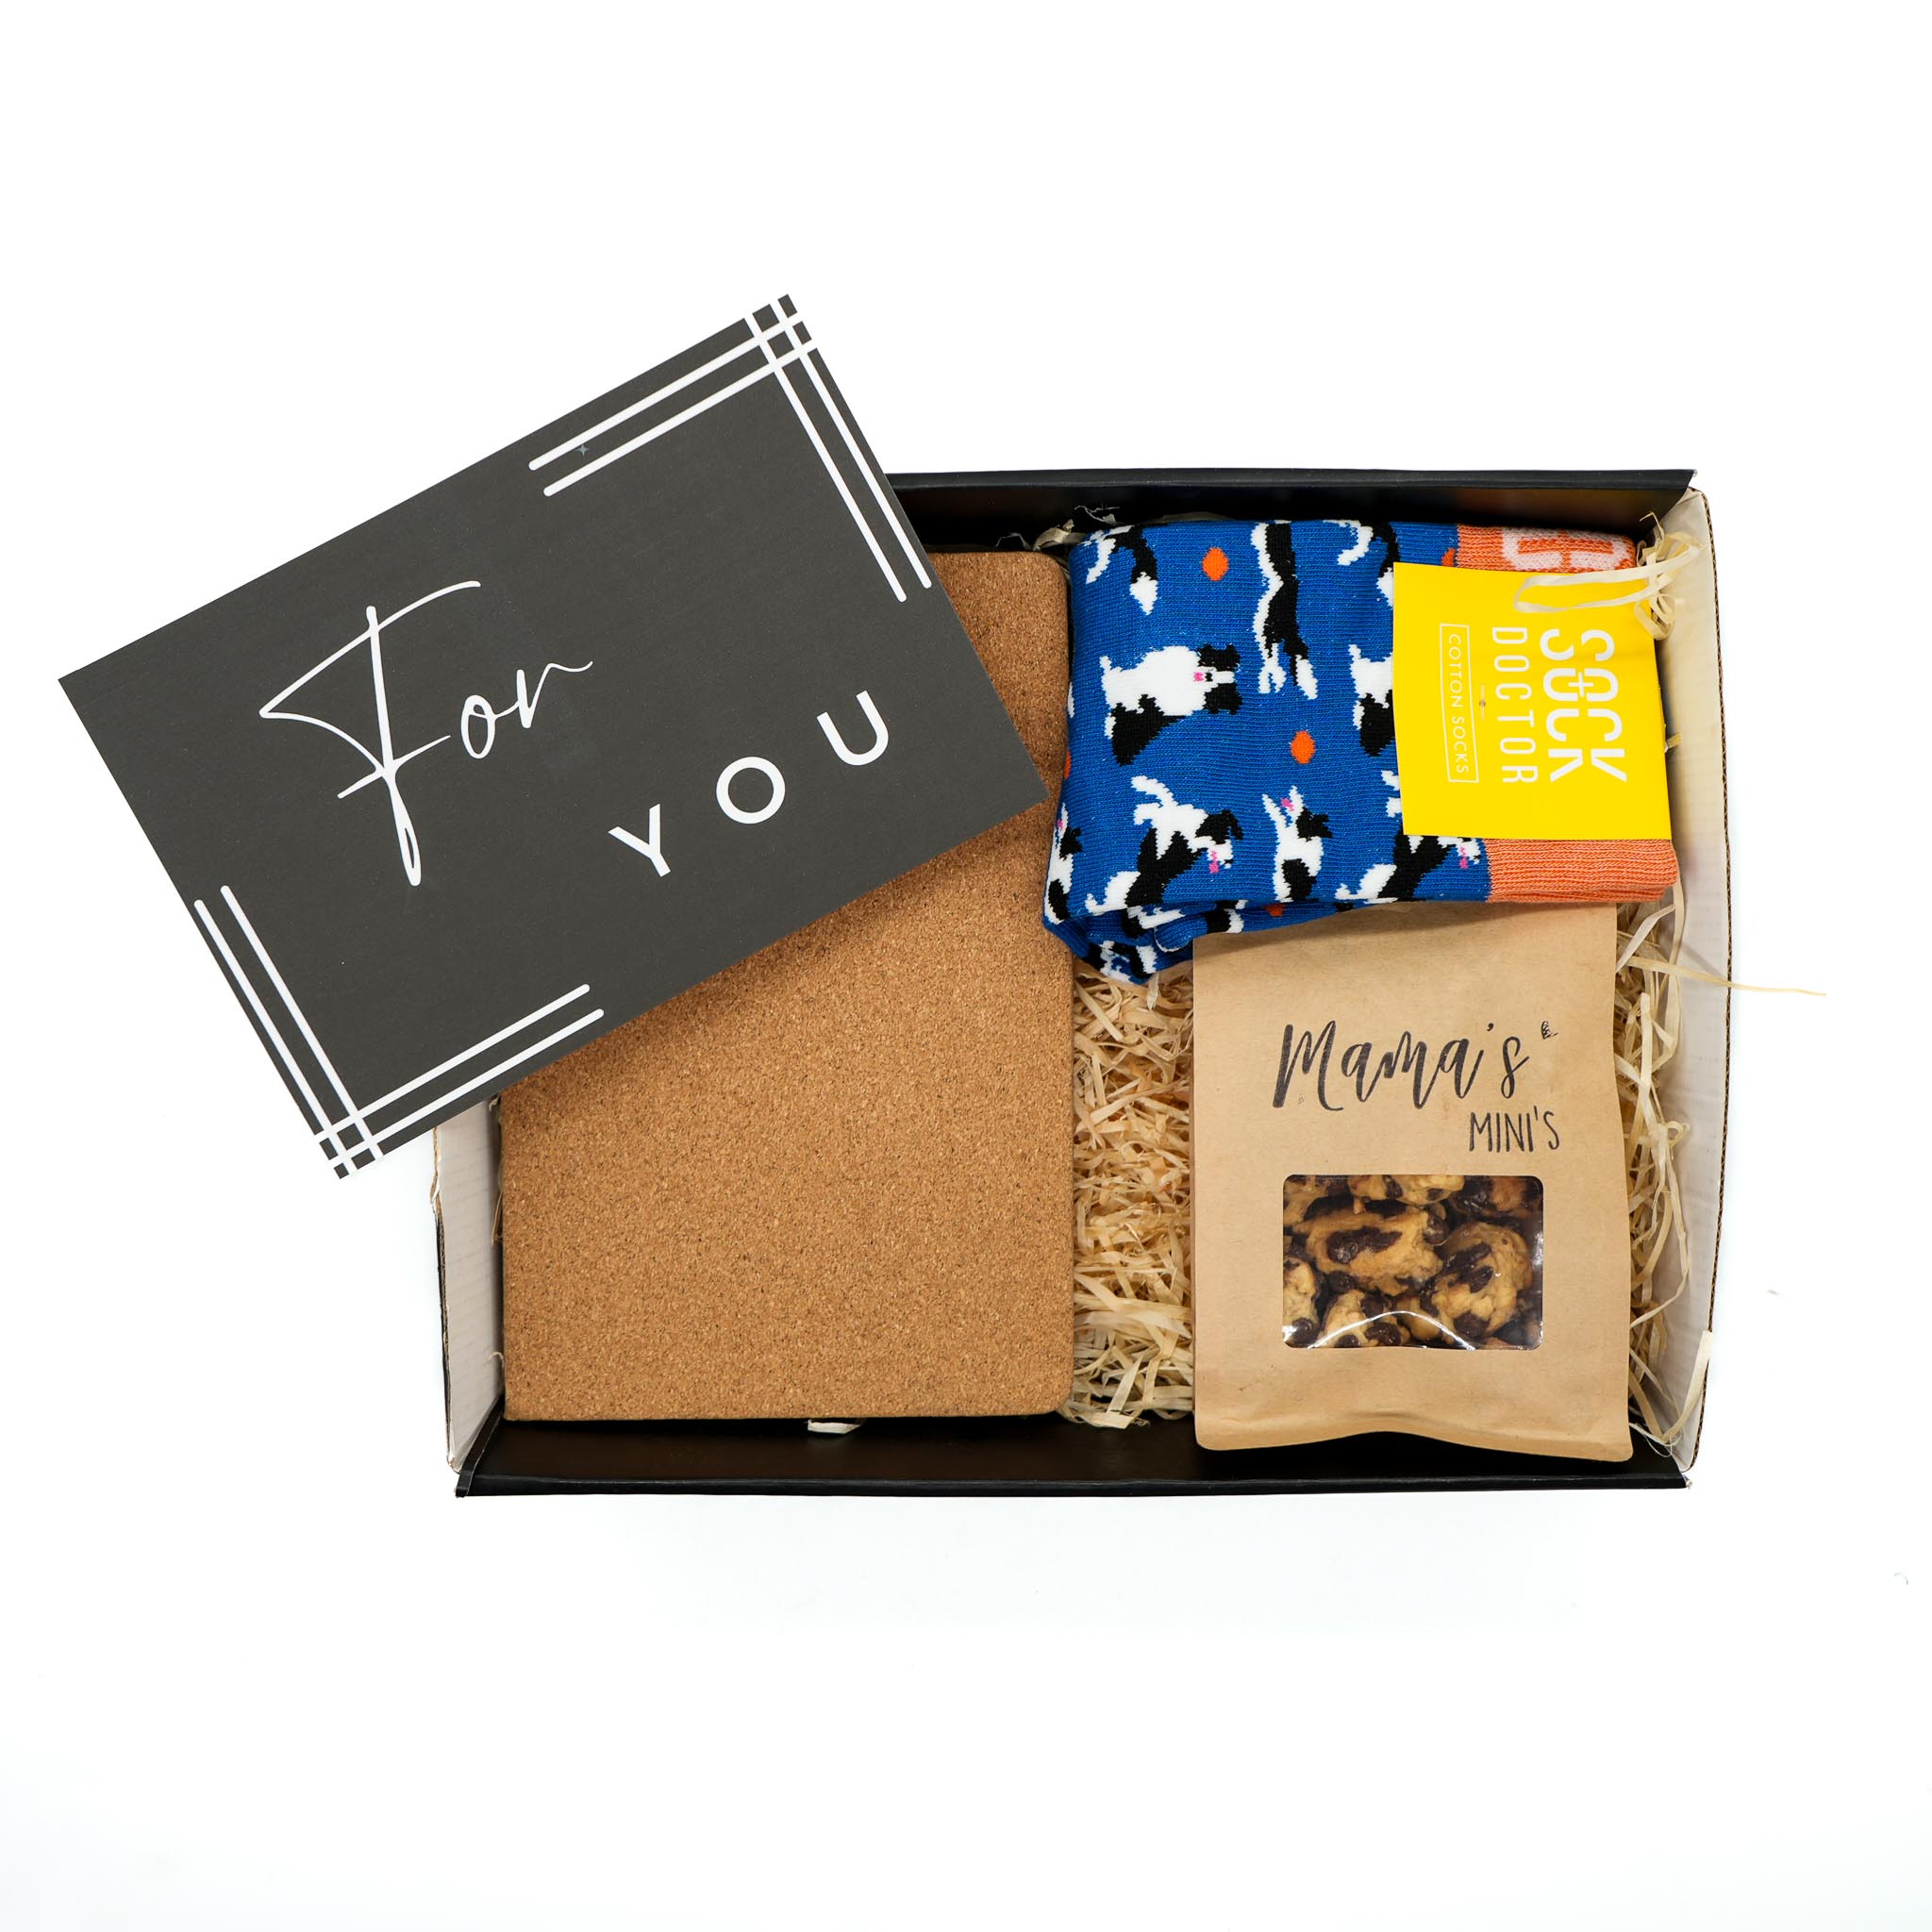 socks snacks and supplies gift box ground culture